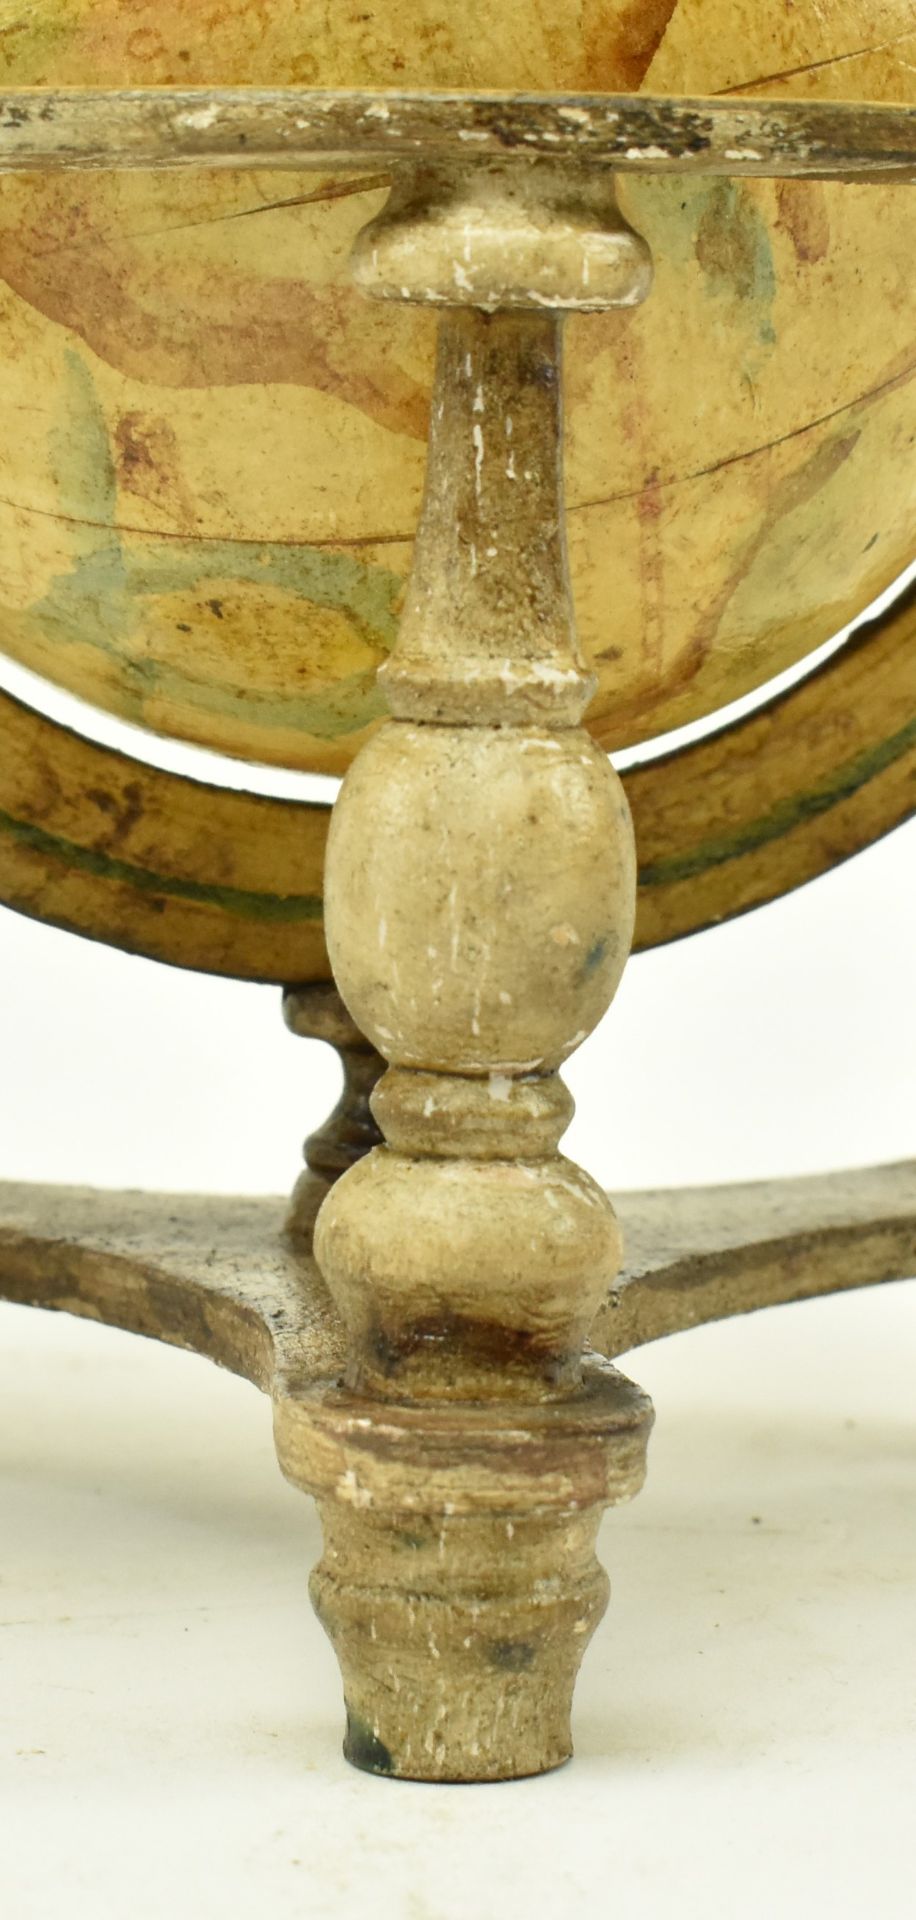 PAIR OF EARLY 20TH CENTURY METAL & WOOD CELESTIAL GLOBES - Image 4 of 6